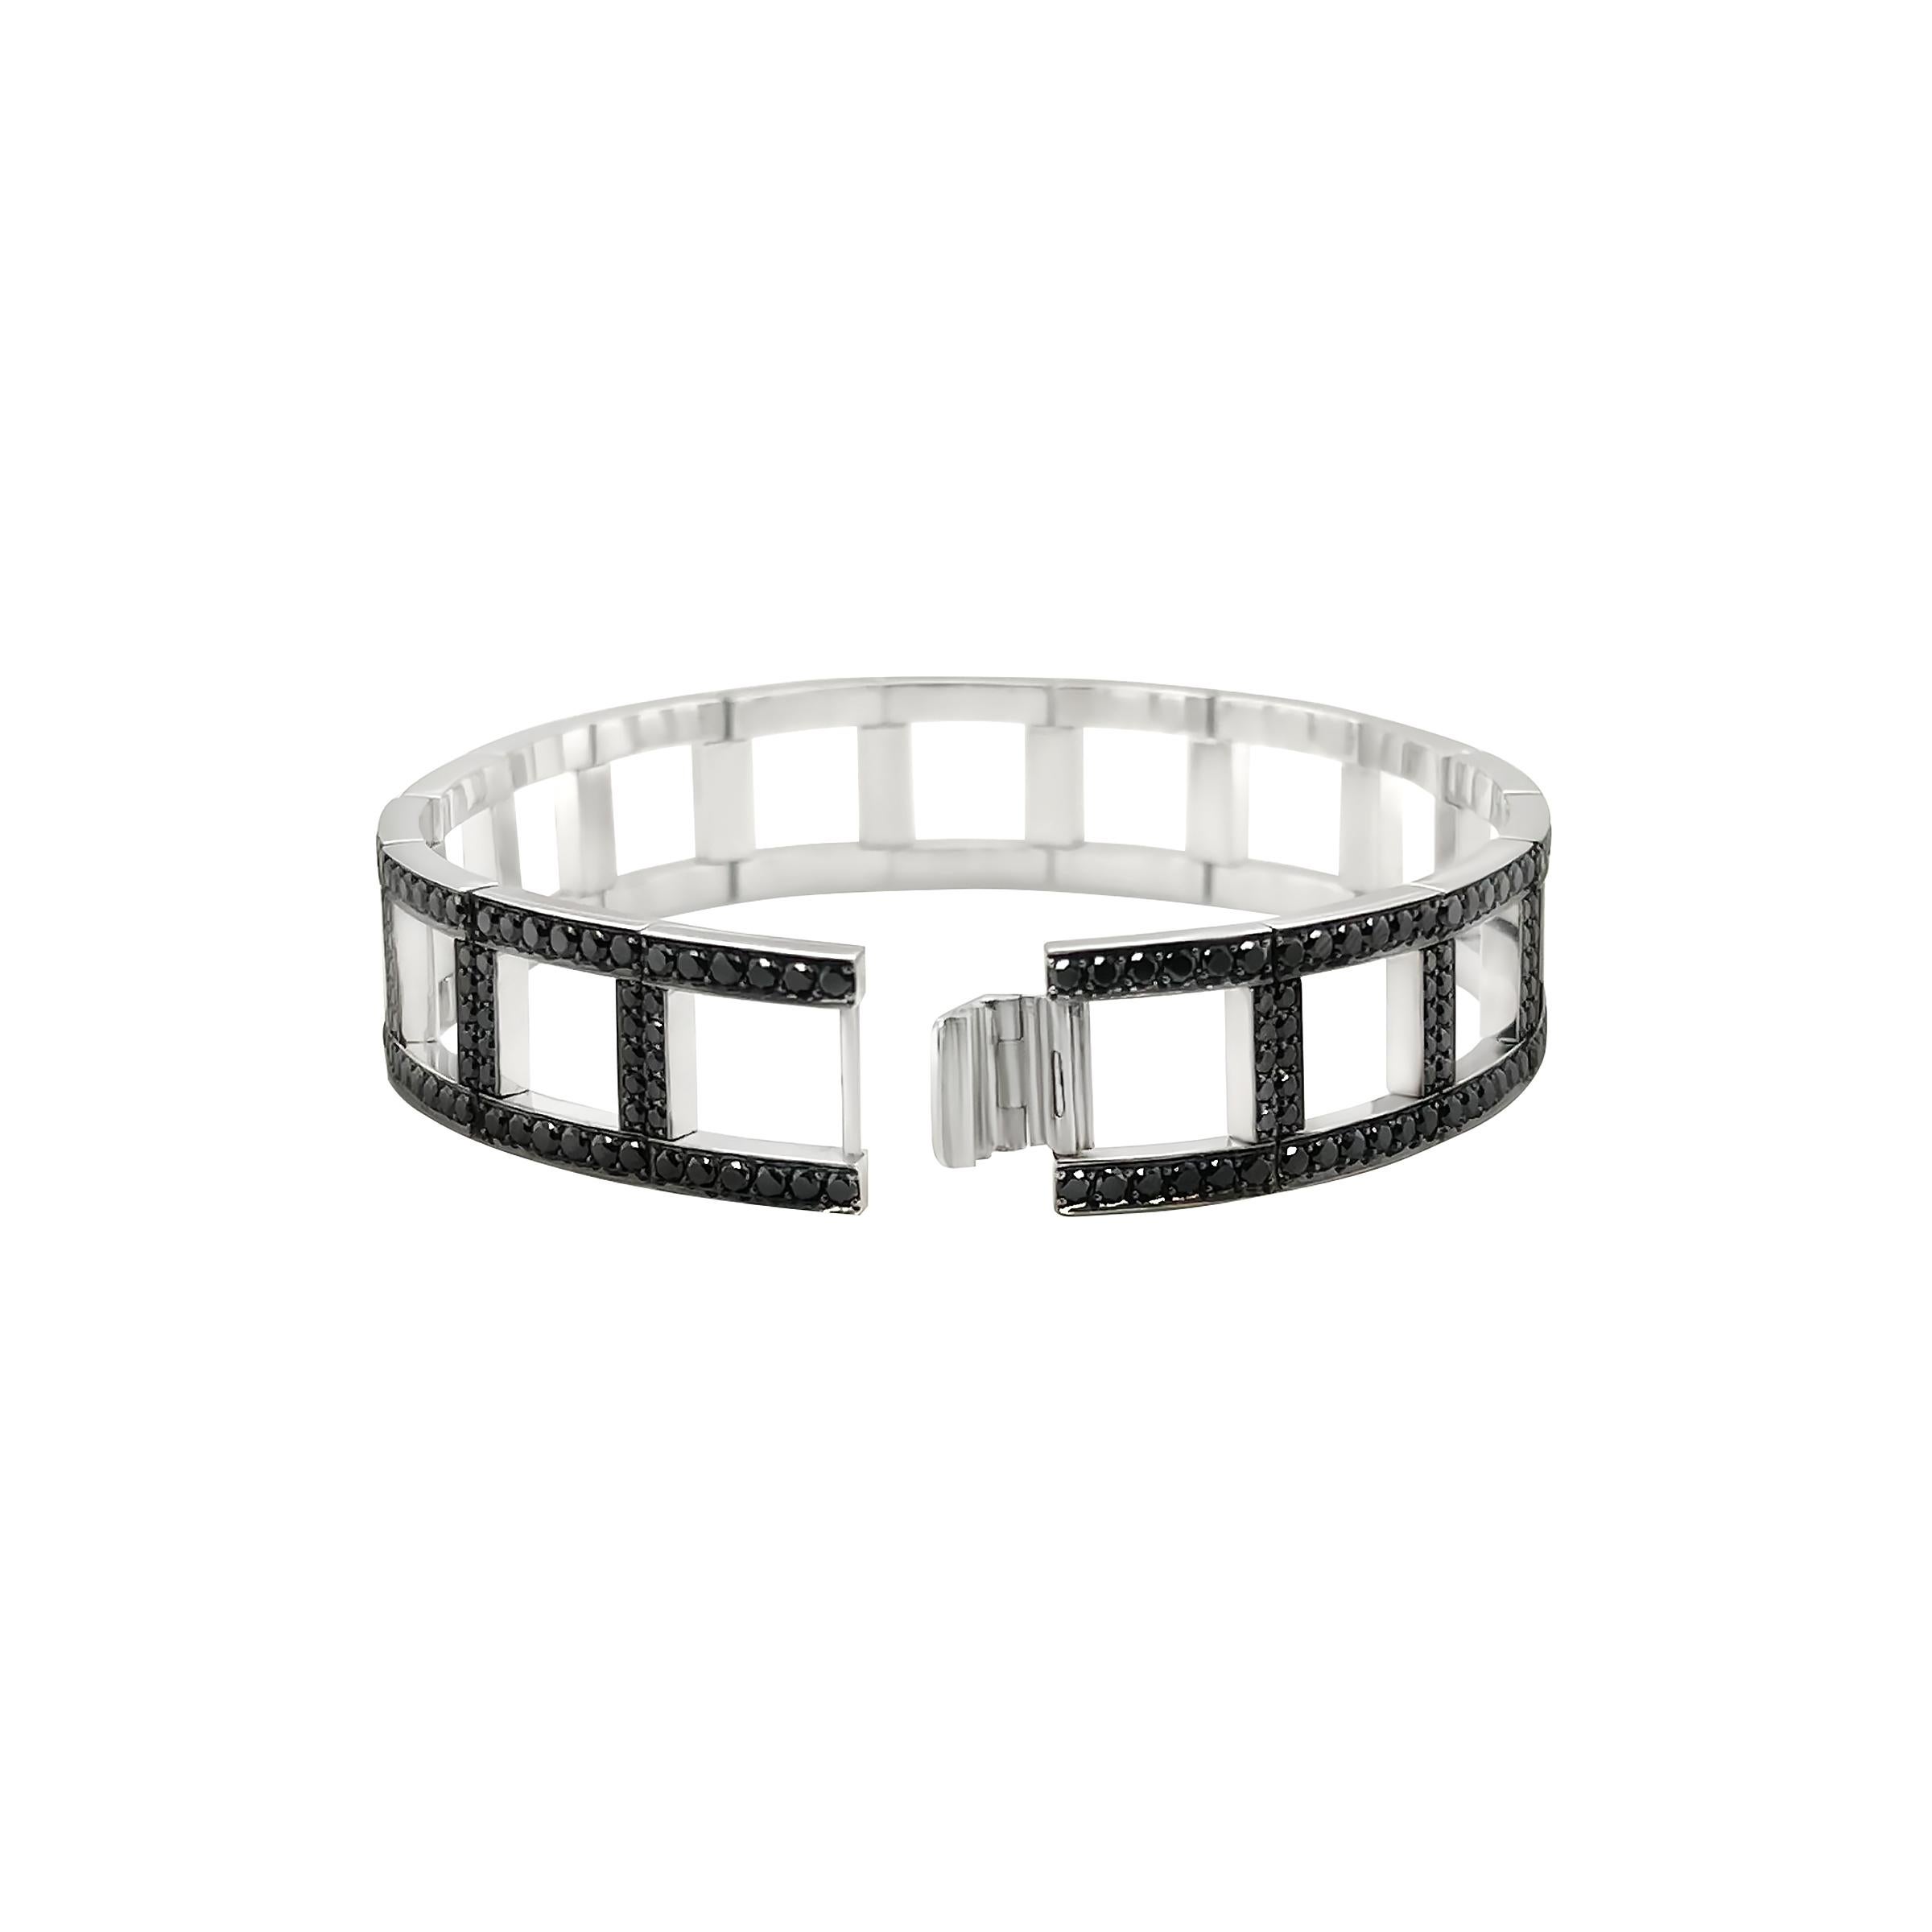 Designed for him or her this Black Diamond Link bracelet is the epitome of luxury and refinement.

Expertly crafted in 18k white gold this stunning bracelet showcases 8.45 carats of natural black diamonds selected for the highest quality. The